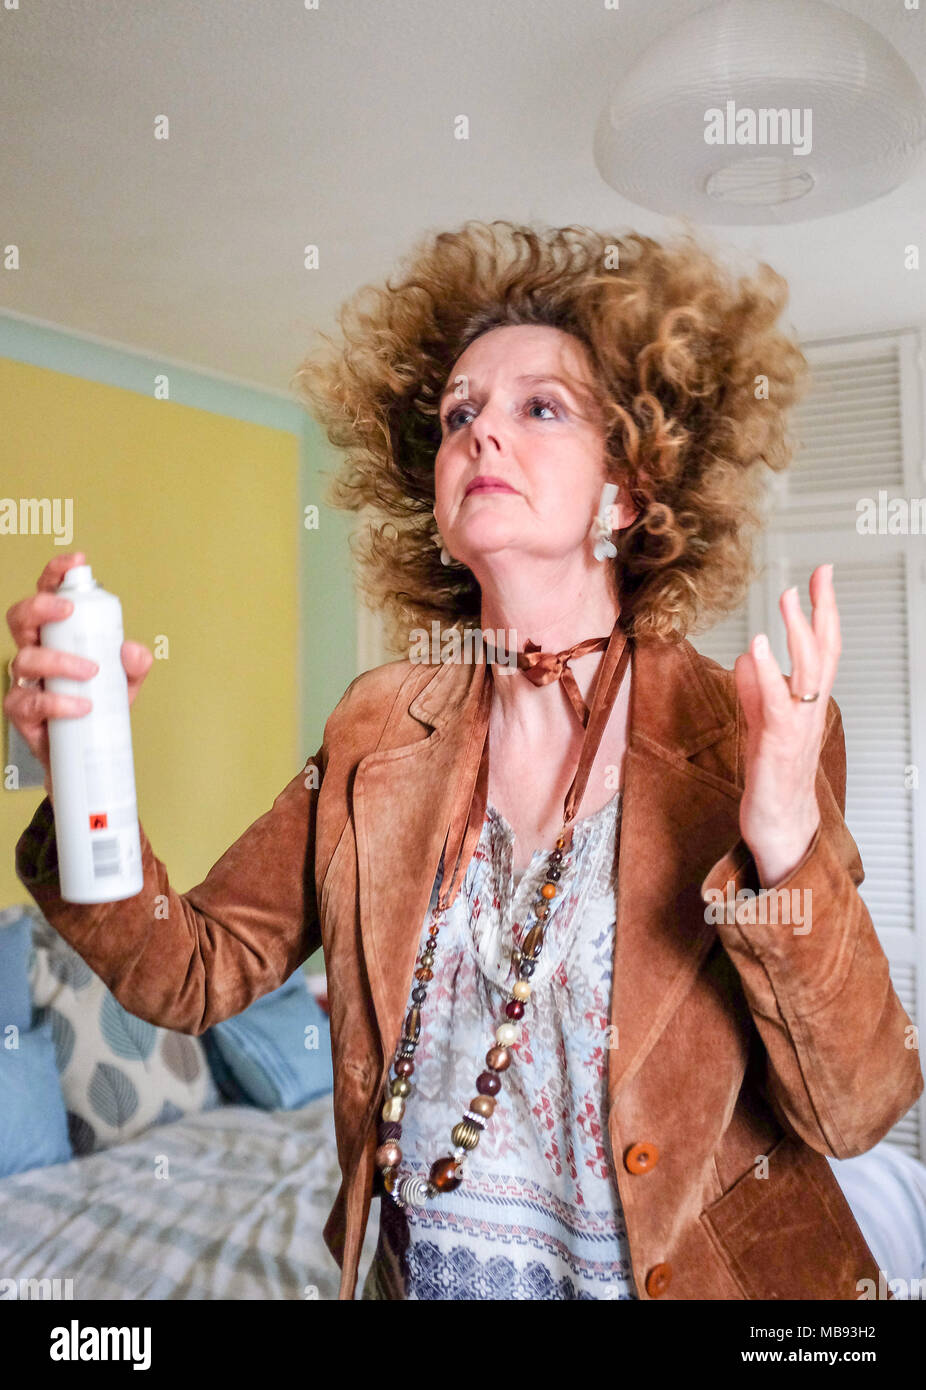 Middle aged mature woman using hair spray on highlighted blonde curly hair ready for ash evening out Photograph taken by Simon Dack Stock Photo